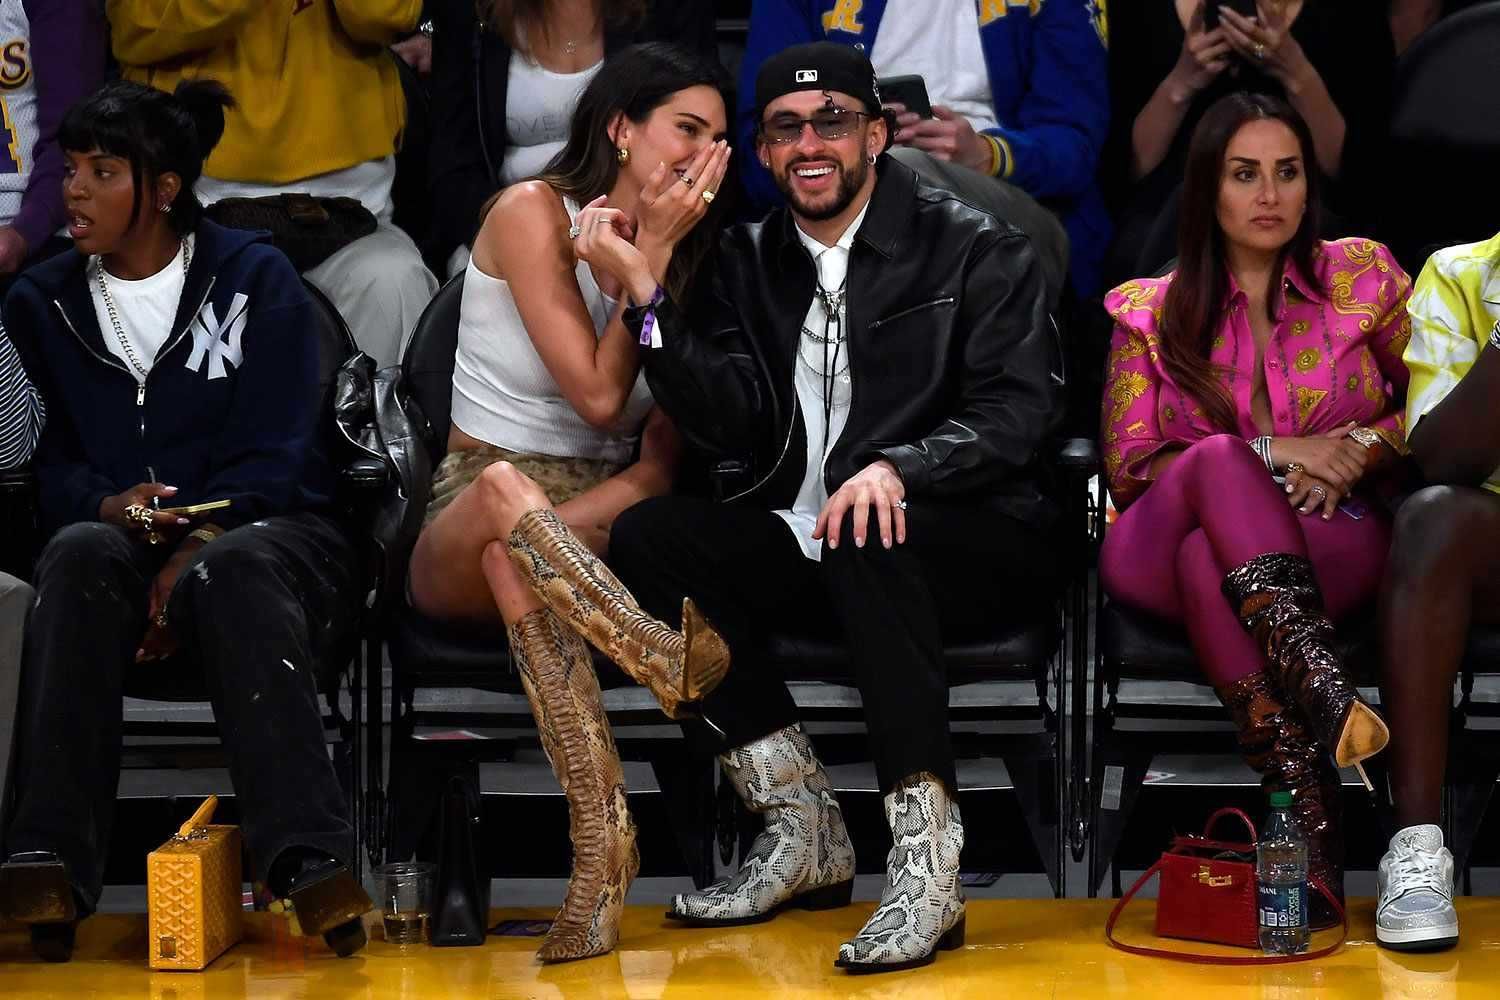 Kendall Jenner and Bad Bunny (Source: Parade)